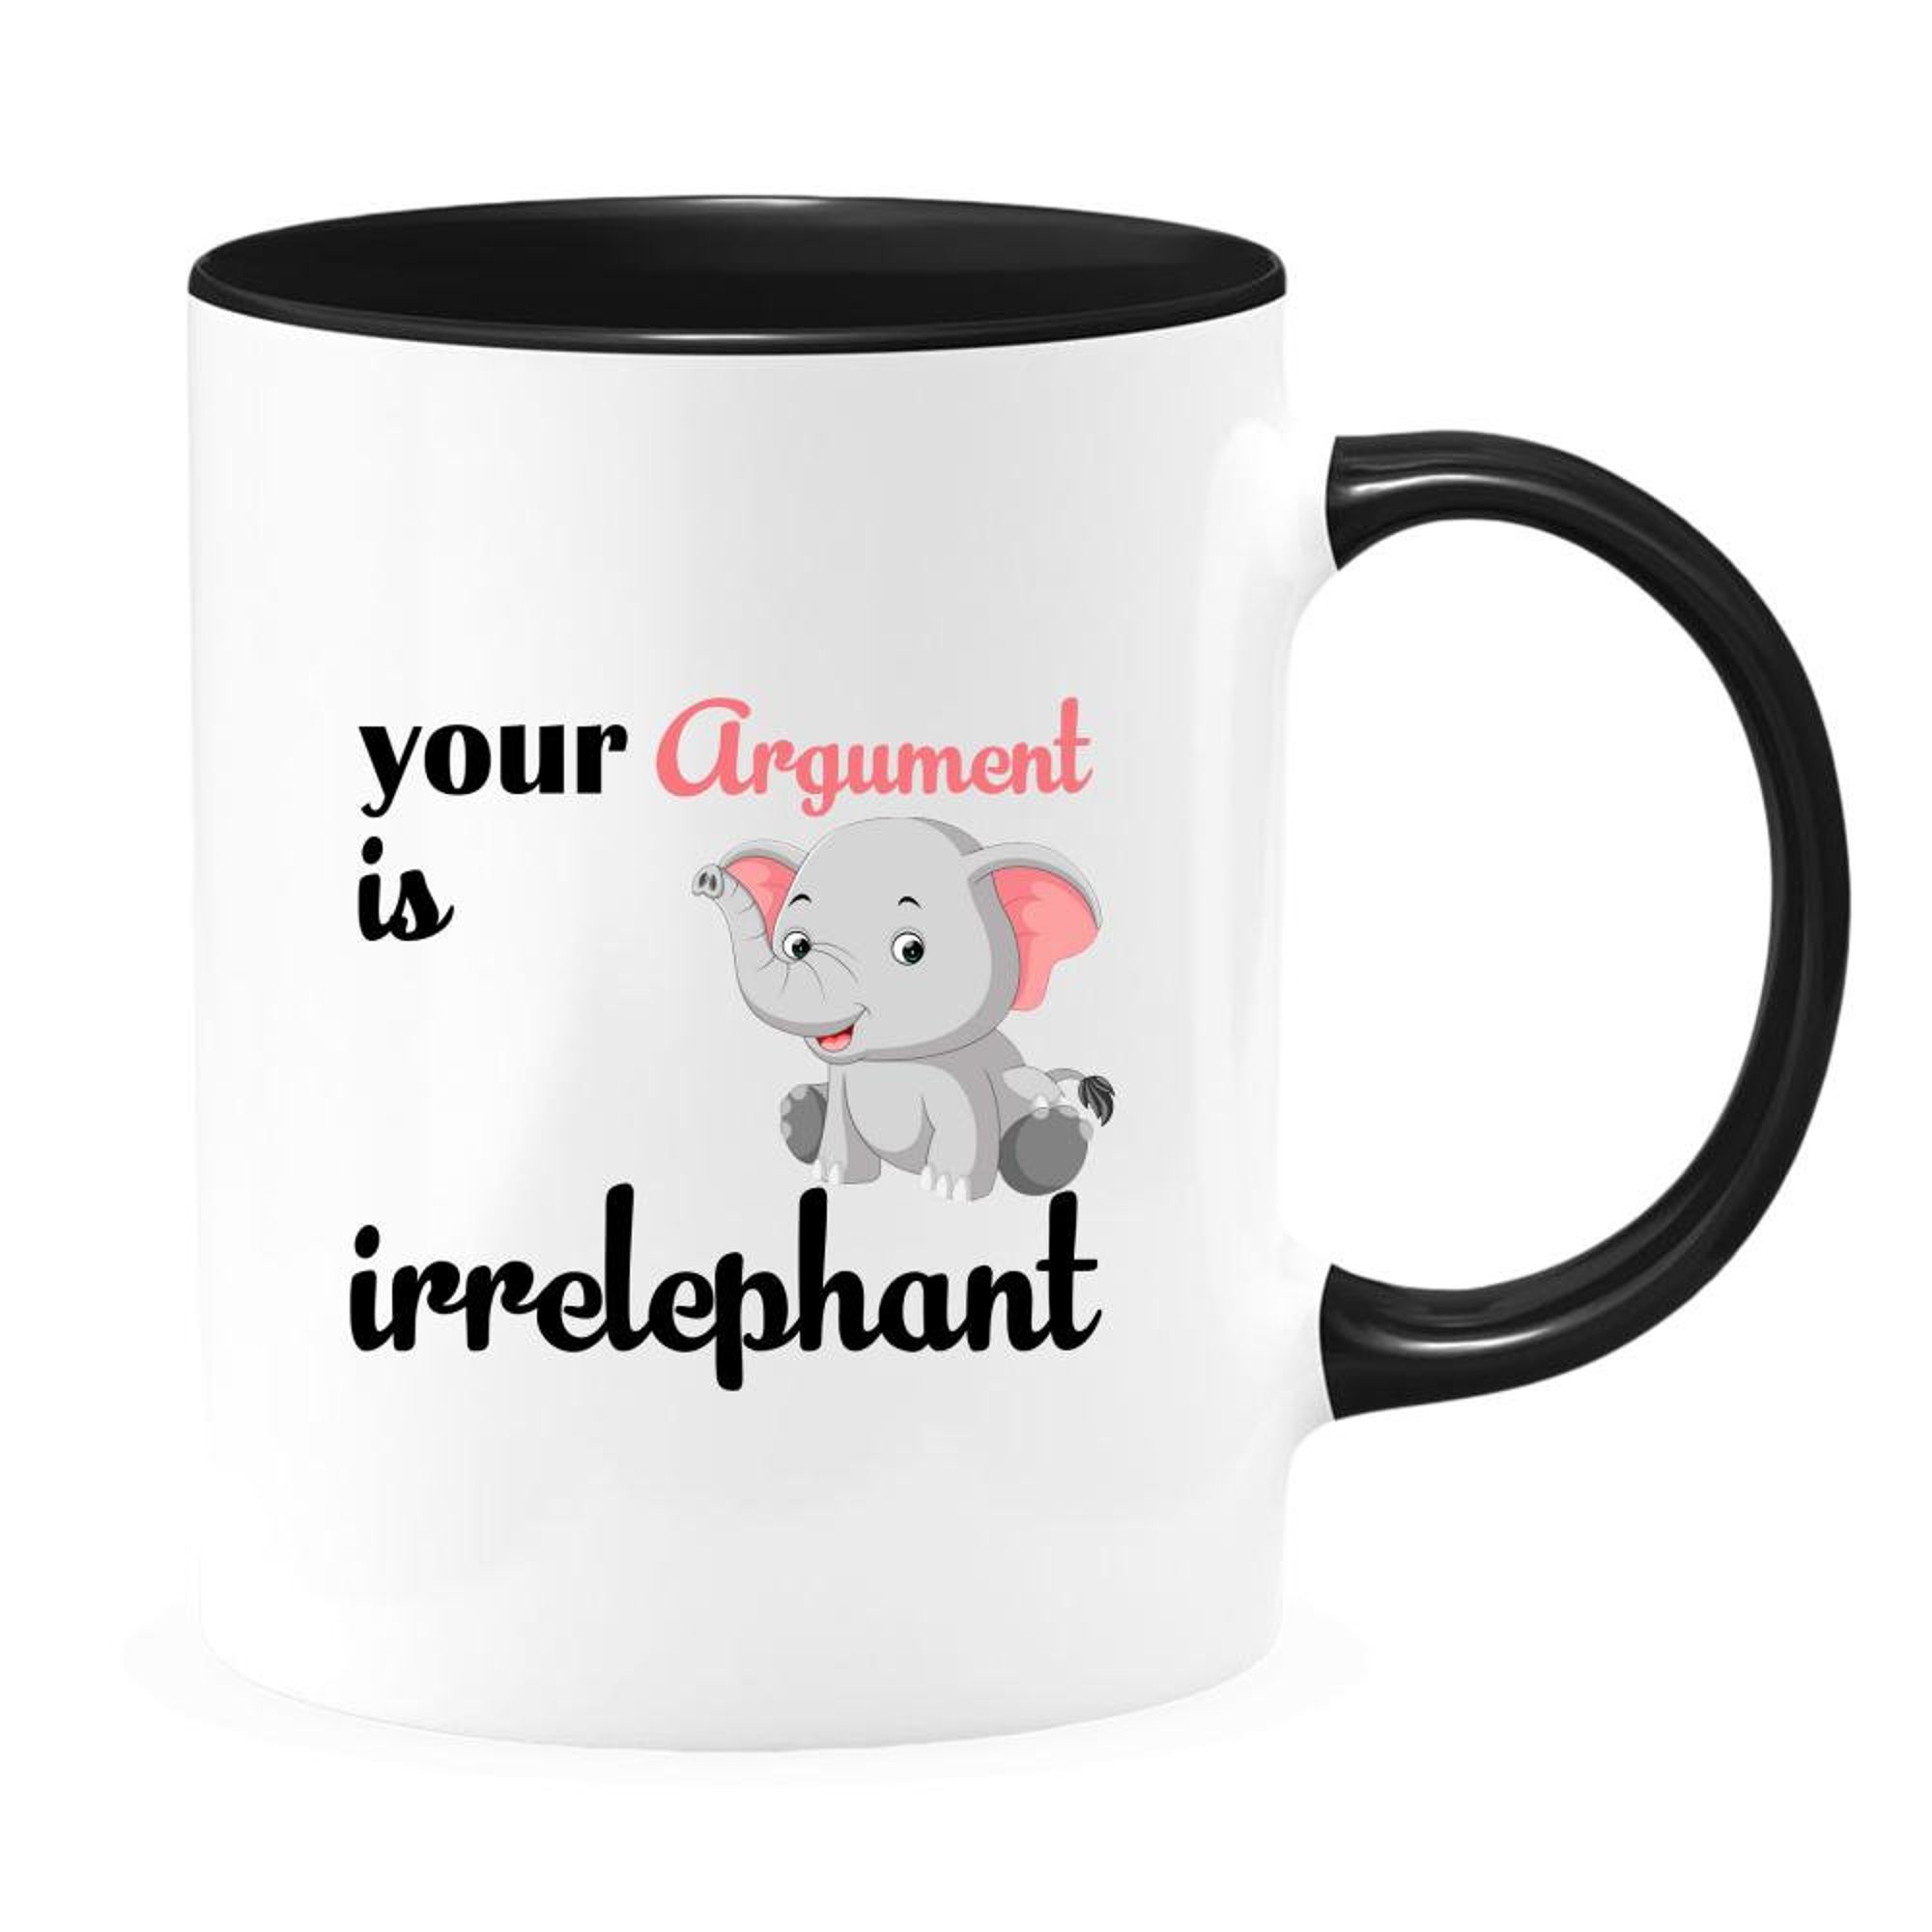 Your Argument is Irrelephant Two-Tone Coffee Mug for Lawyers, Gift for Attorneys